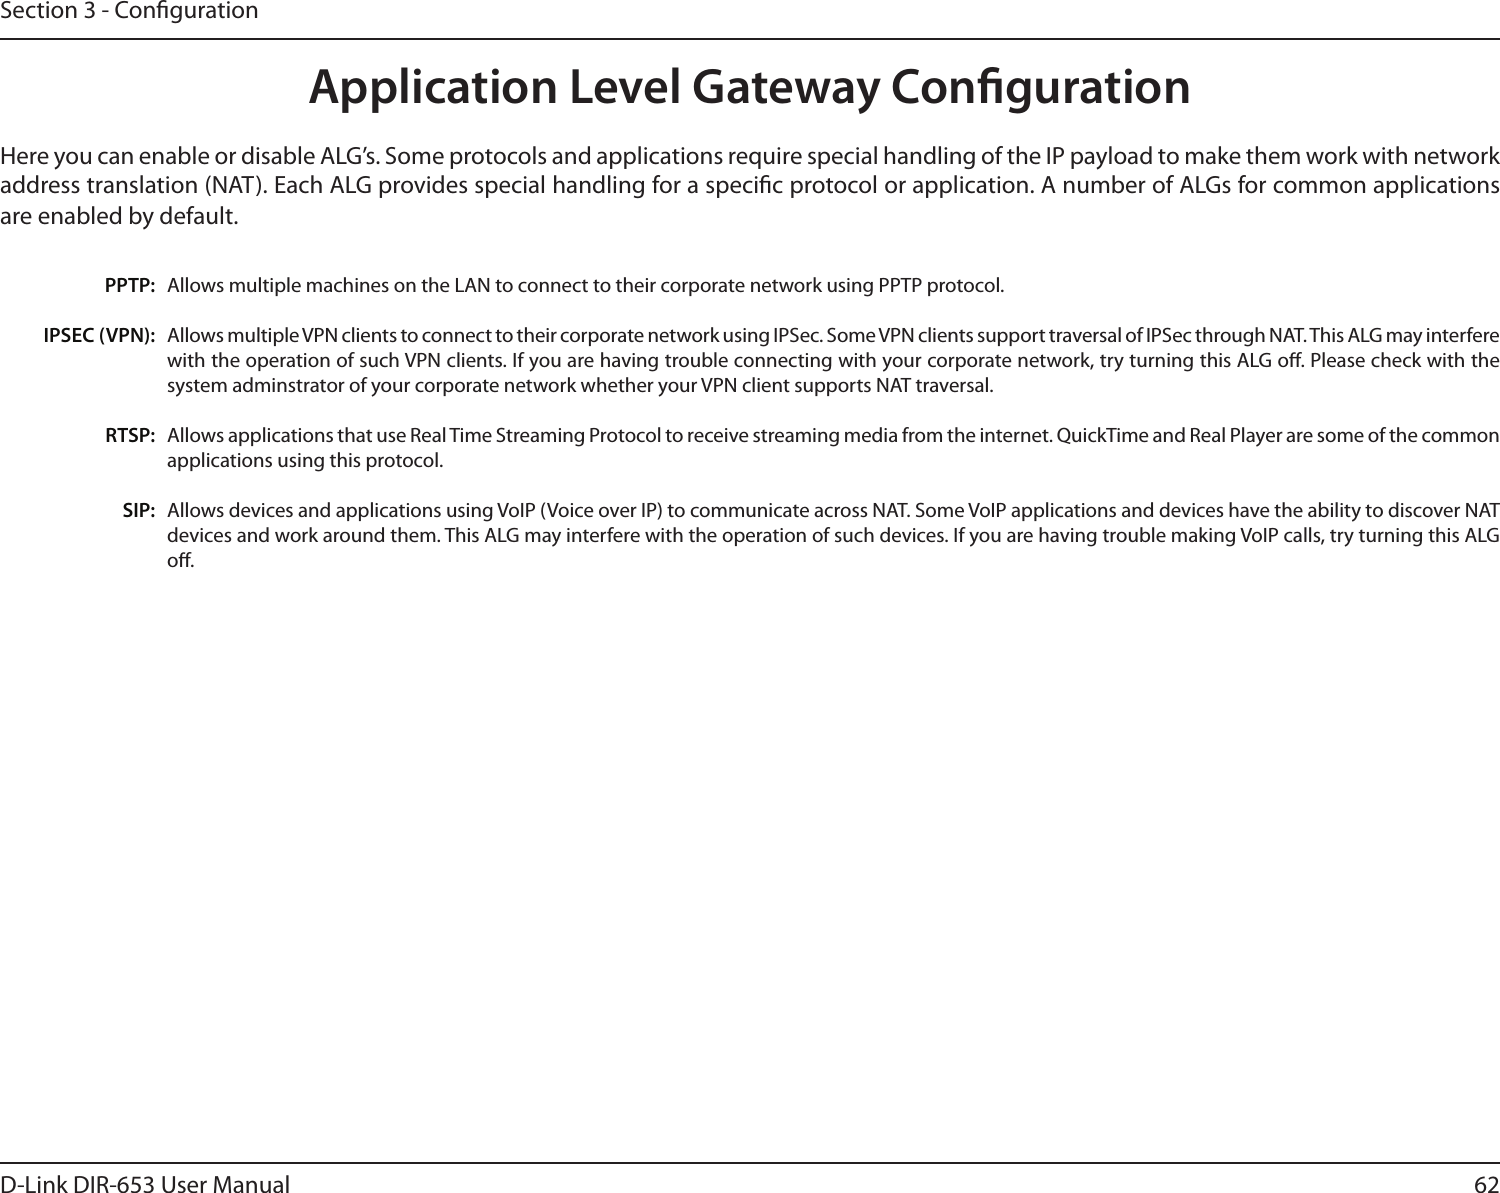 62D-Link DIR-653 User ManualSection 3 - CongurationApplication Level Gateway CongurationHere you can enable or disable ALG’s. Some protocols and applications require special handling of the IP payload to make them work with network address translation (NAT). Each ALG provides special handling for a specic protocol or application. A number of ALGs for common applications are enabled by default.Allows multiple machines on the LAN to connect to their corporate network using PPTP protocol. Allows multiple VPN clients to connect to their corporate network using IPSec. Some VPN clients support traversal of IPSec through NAT. This ALG may interfere with the operation of such VPN clients. If you are having trouble connecting with your corporate network, try turning this ALG o. Please check with the system adminstrator of your corporate network whether your VPN client supports NAT traversal.Allows applications that use Real Time Streaming Protocol to receive streaming media from the internet. QuickTime and Real Player are some of the common applications using this protocol. Allows devices and applications using VoIP (Voice over IP) to communicate across NAT. Some VoIP applications and devices have the ability to discover NAT devices and work around them. This ALG may interfere with the operation of such devices. If you are having trouble making VoIP calls, try turning this ALG o. PPTP:IPSEC (VPN):RTSP:SIP: